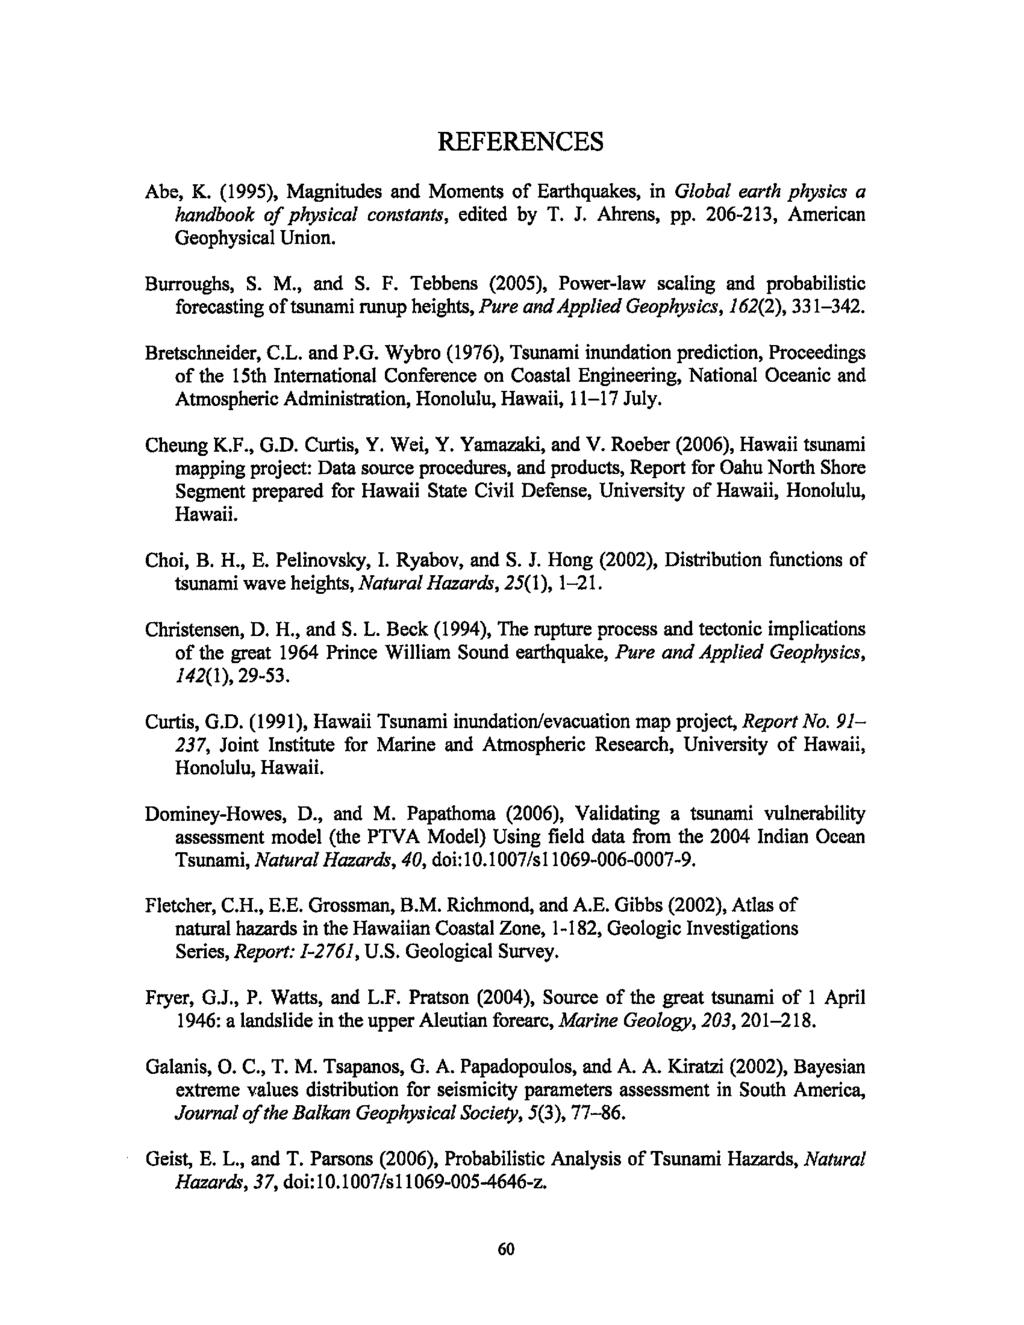 REFERENCES Abe, K. (1995), Magnitudes and Moments of Earthquakes, in Global earth physics a handbook of physical constants, edited by T. J. Ahrens, pp. 206-213, American Geophysical Union.